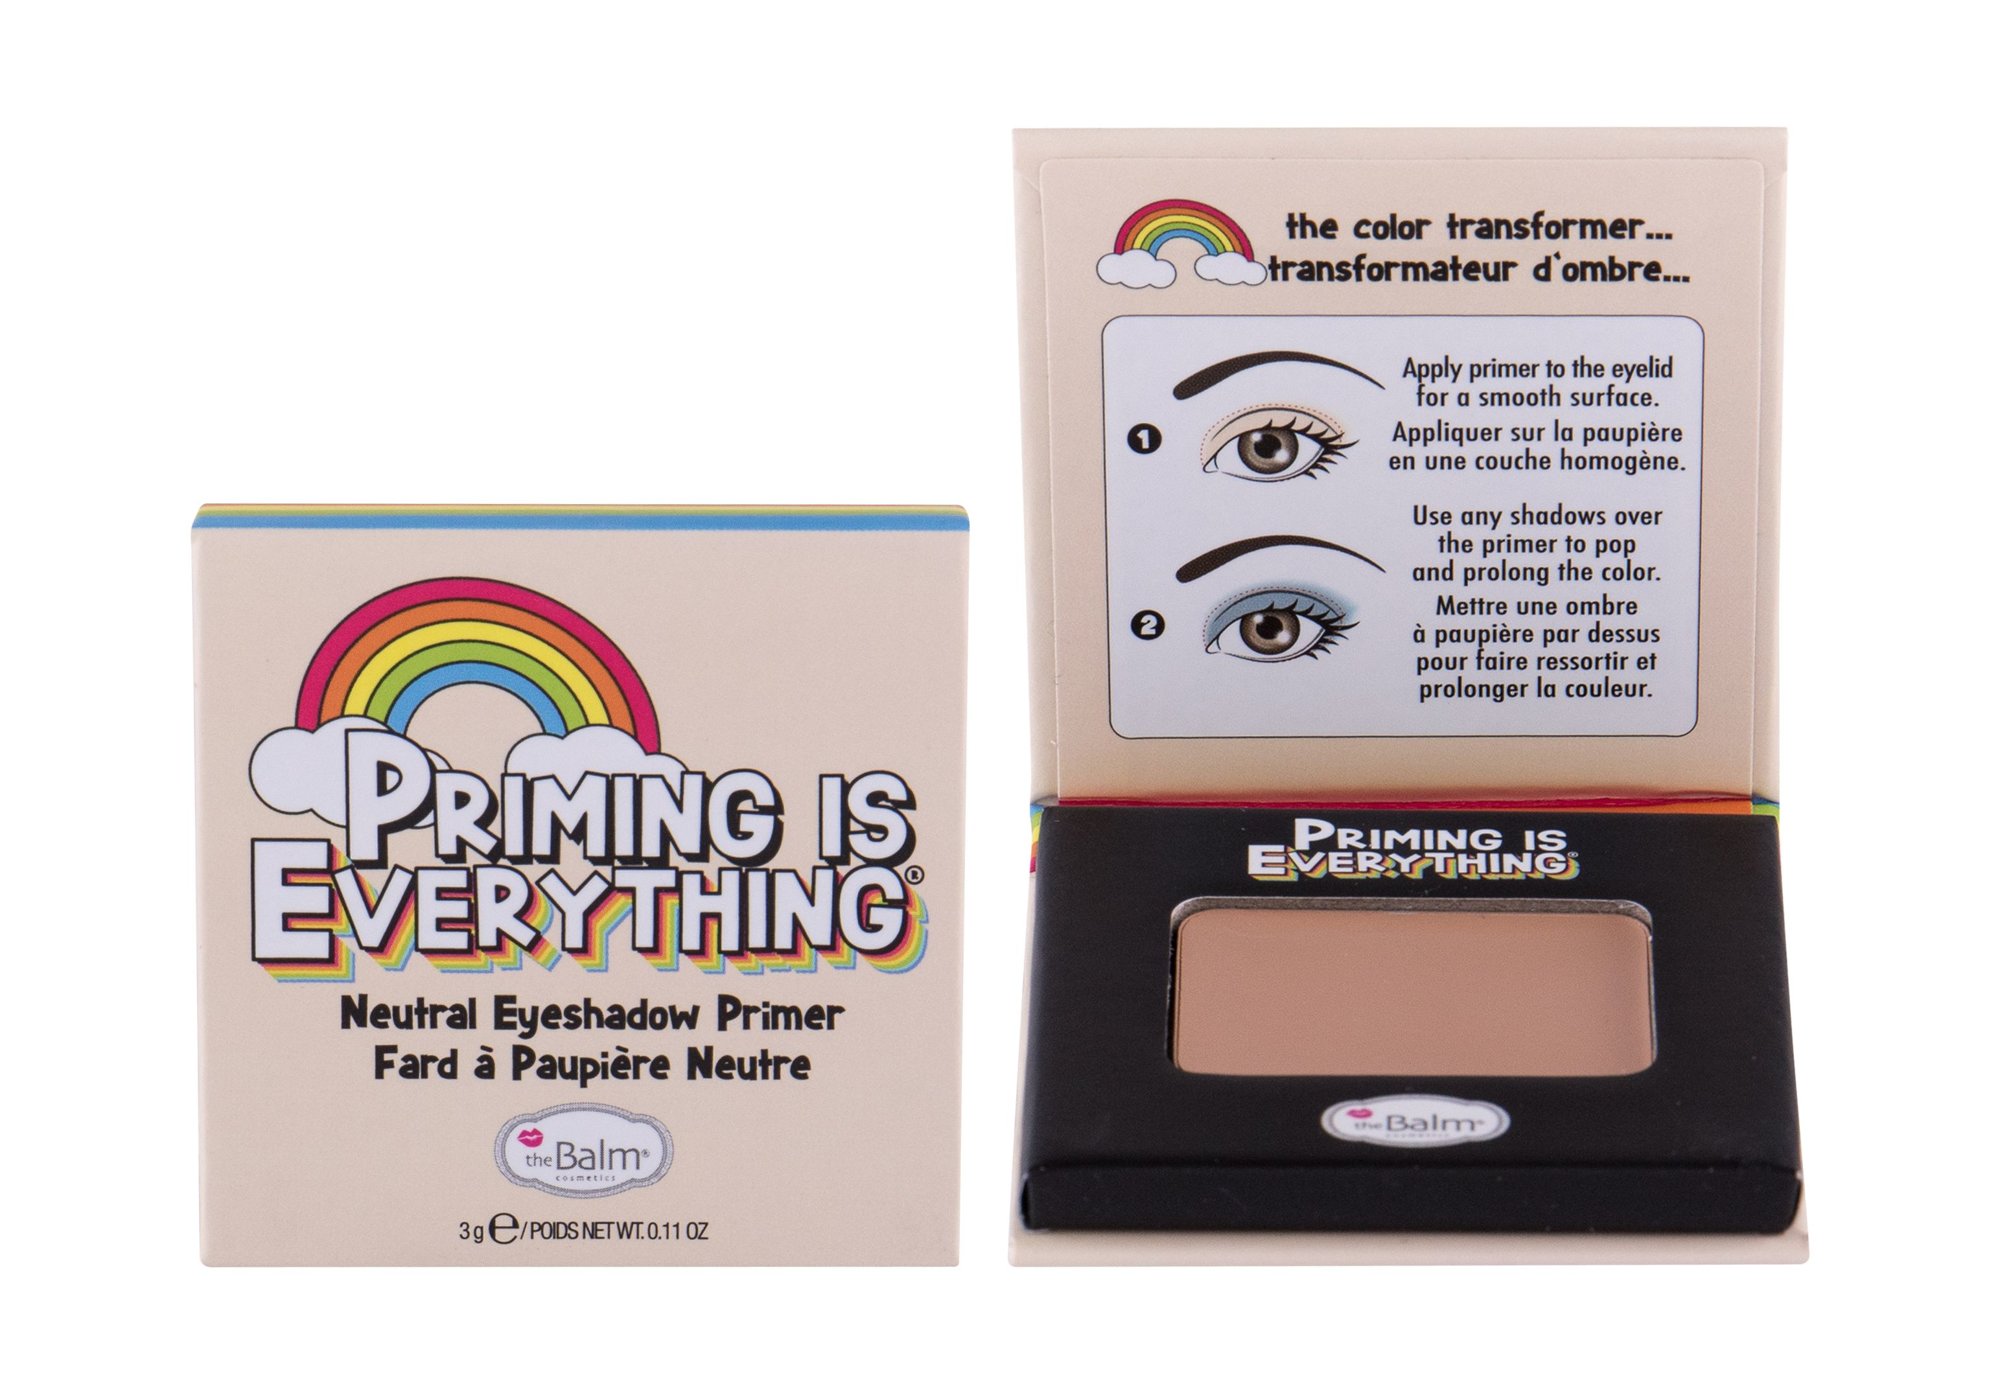 TheBalm Priming is Everything